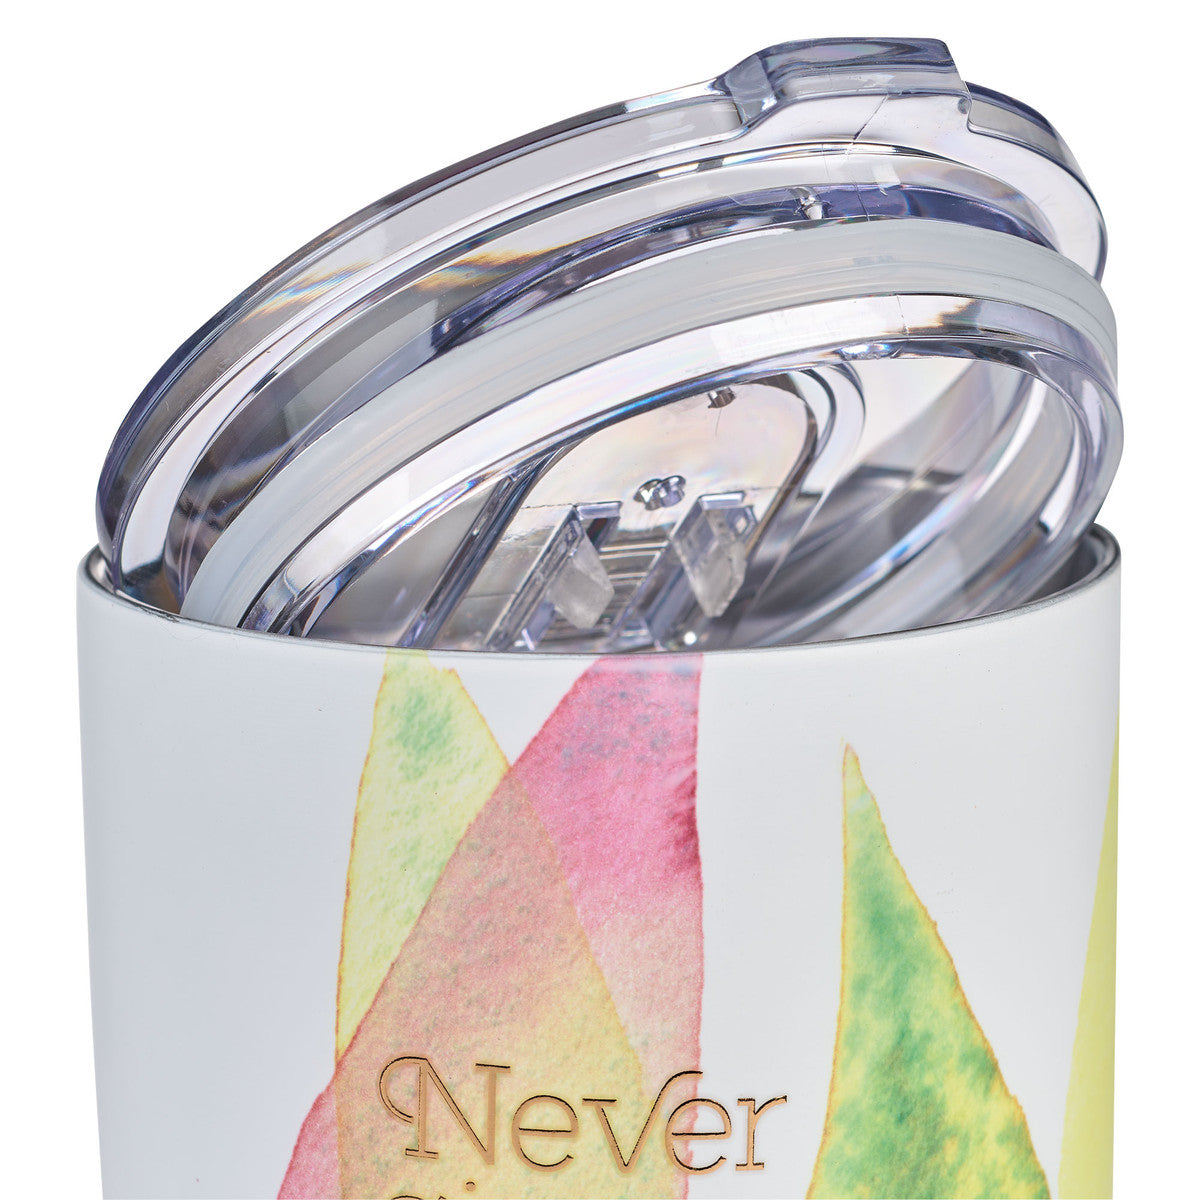 Never Give Up Citrus Leaves Stainless Steel Travel Mug - The Christian Gift Company